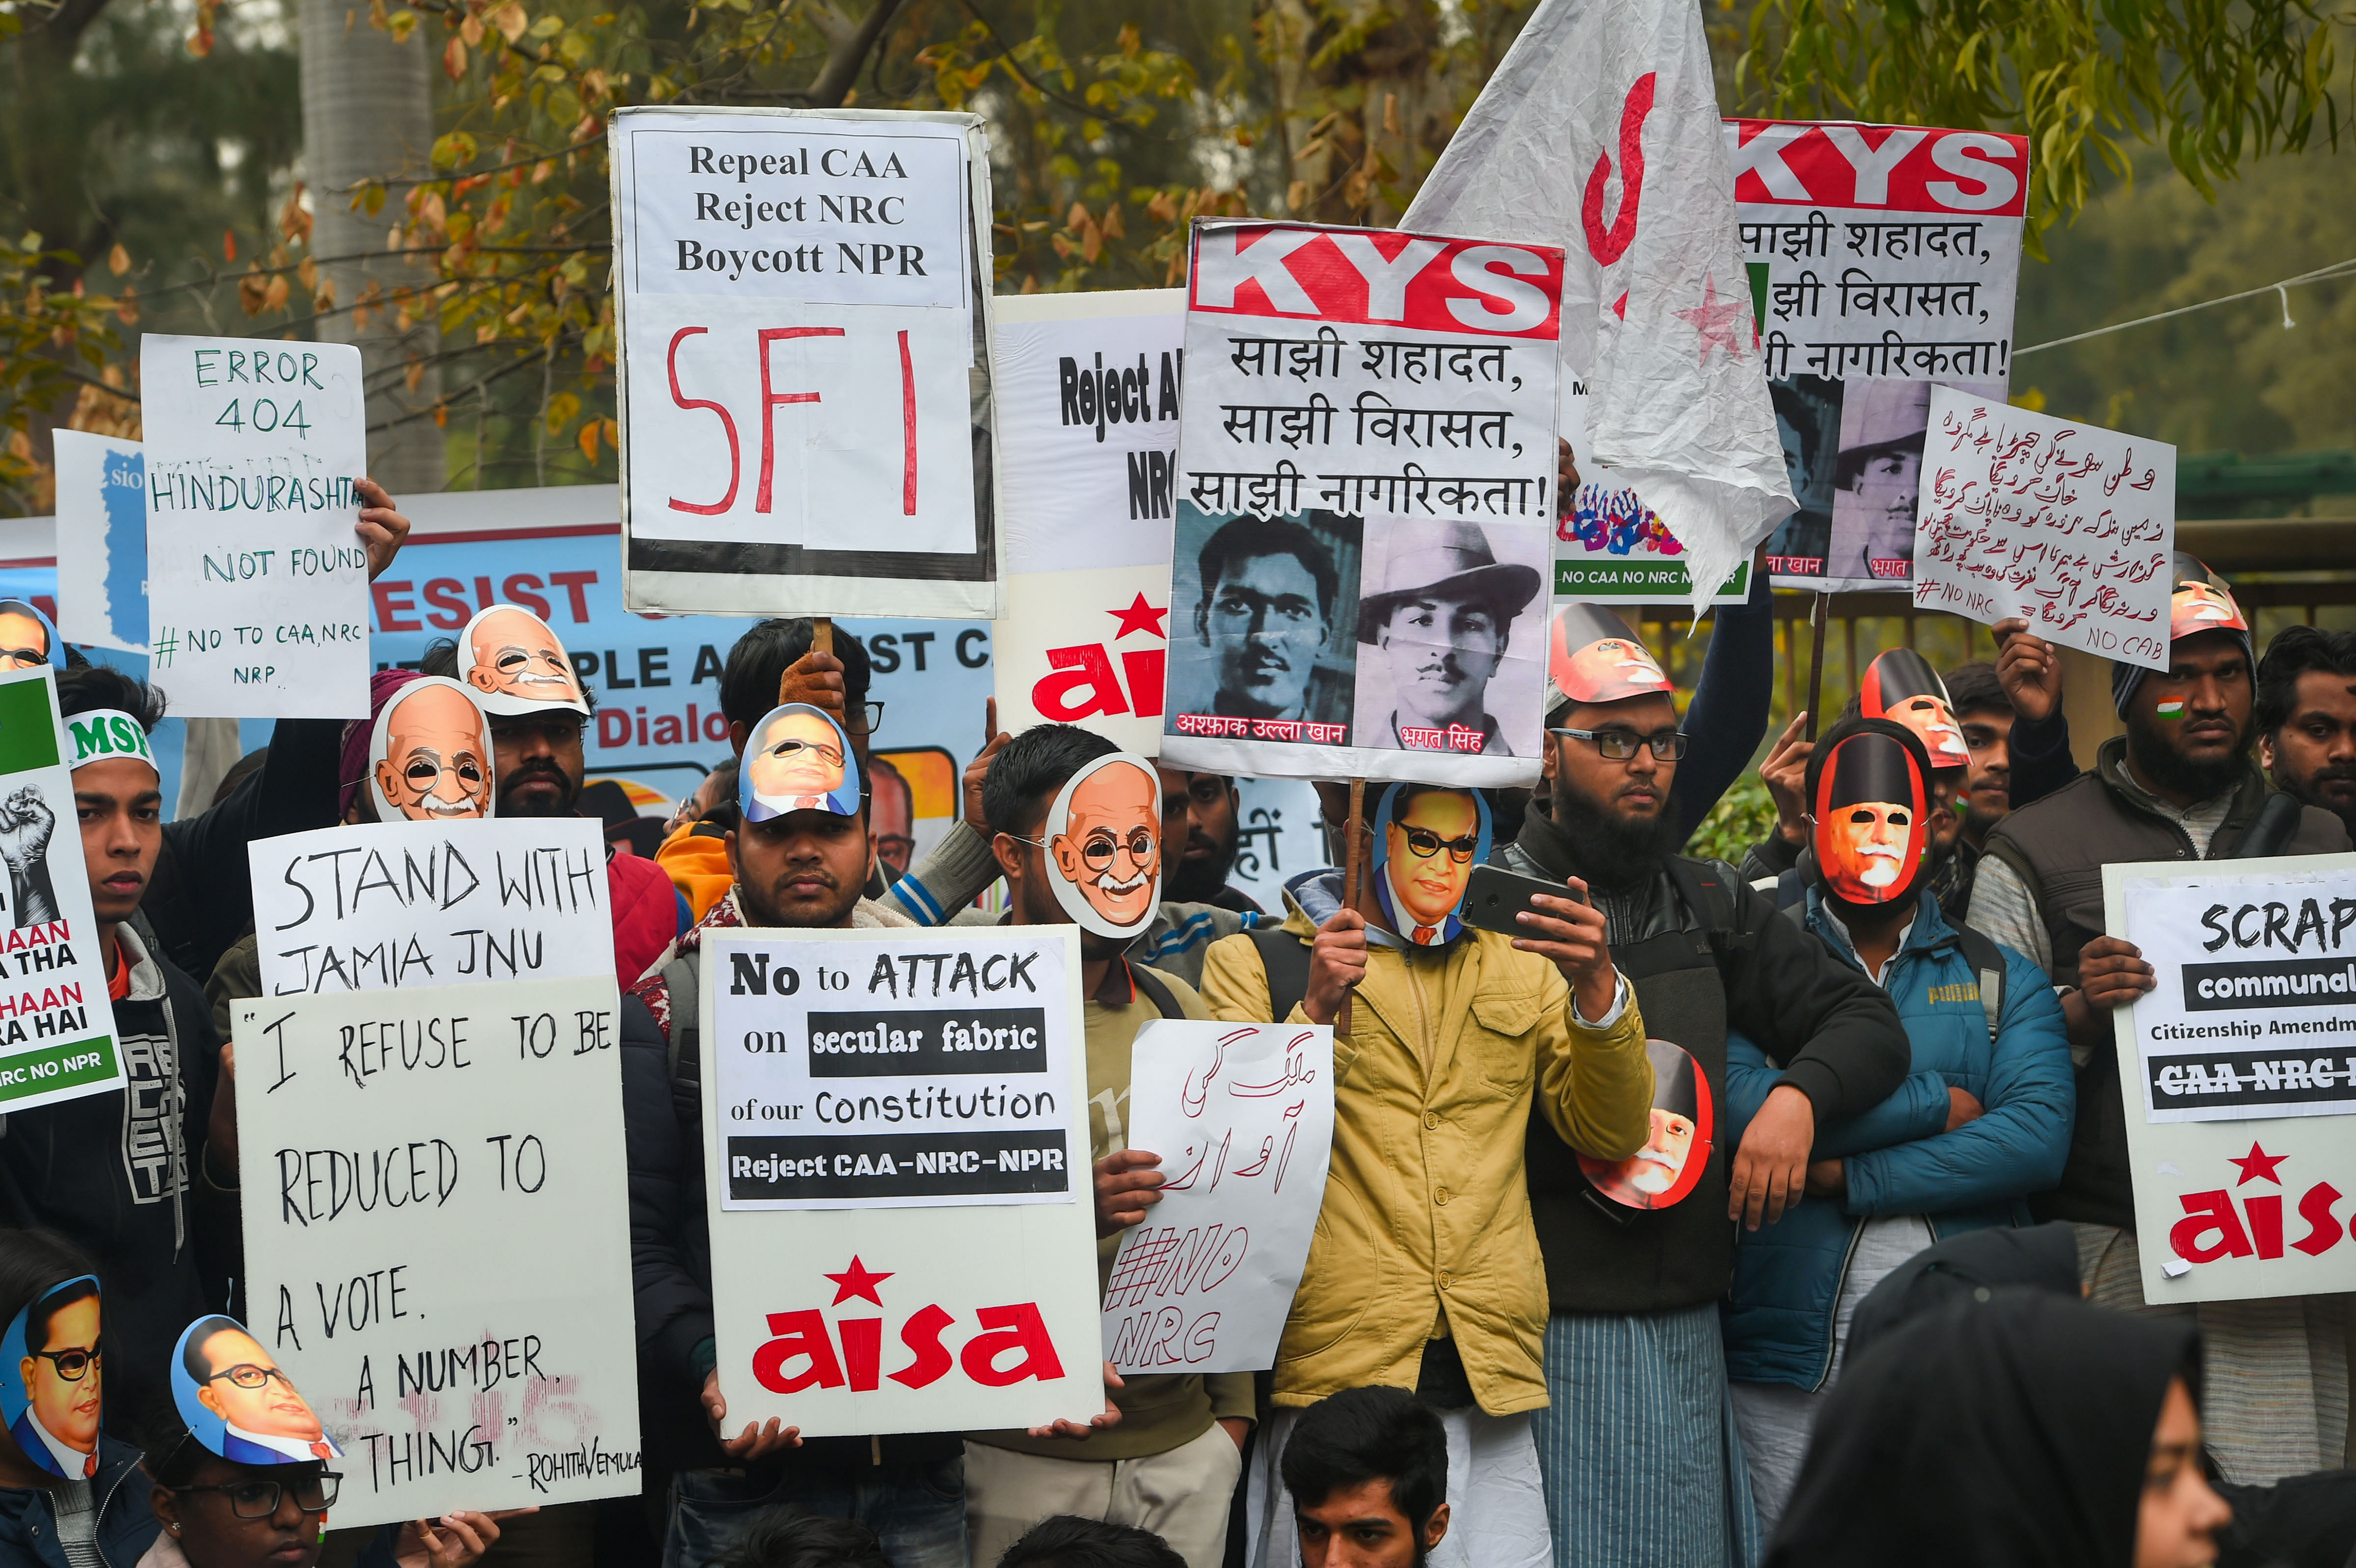 Students display posters and placards during a protest against CAA and NRC at Delhi University's North Campus. (PTI Photo)